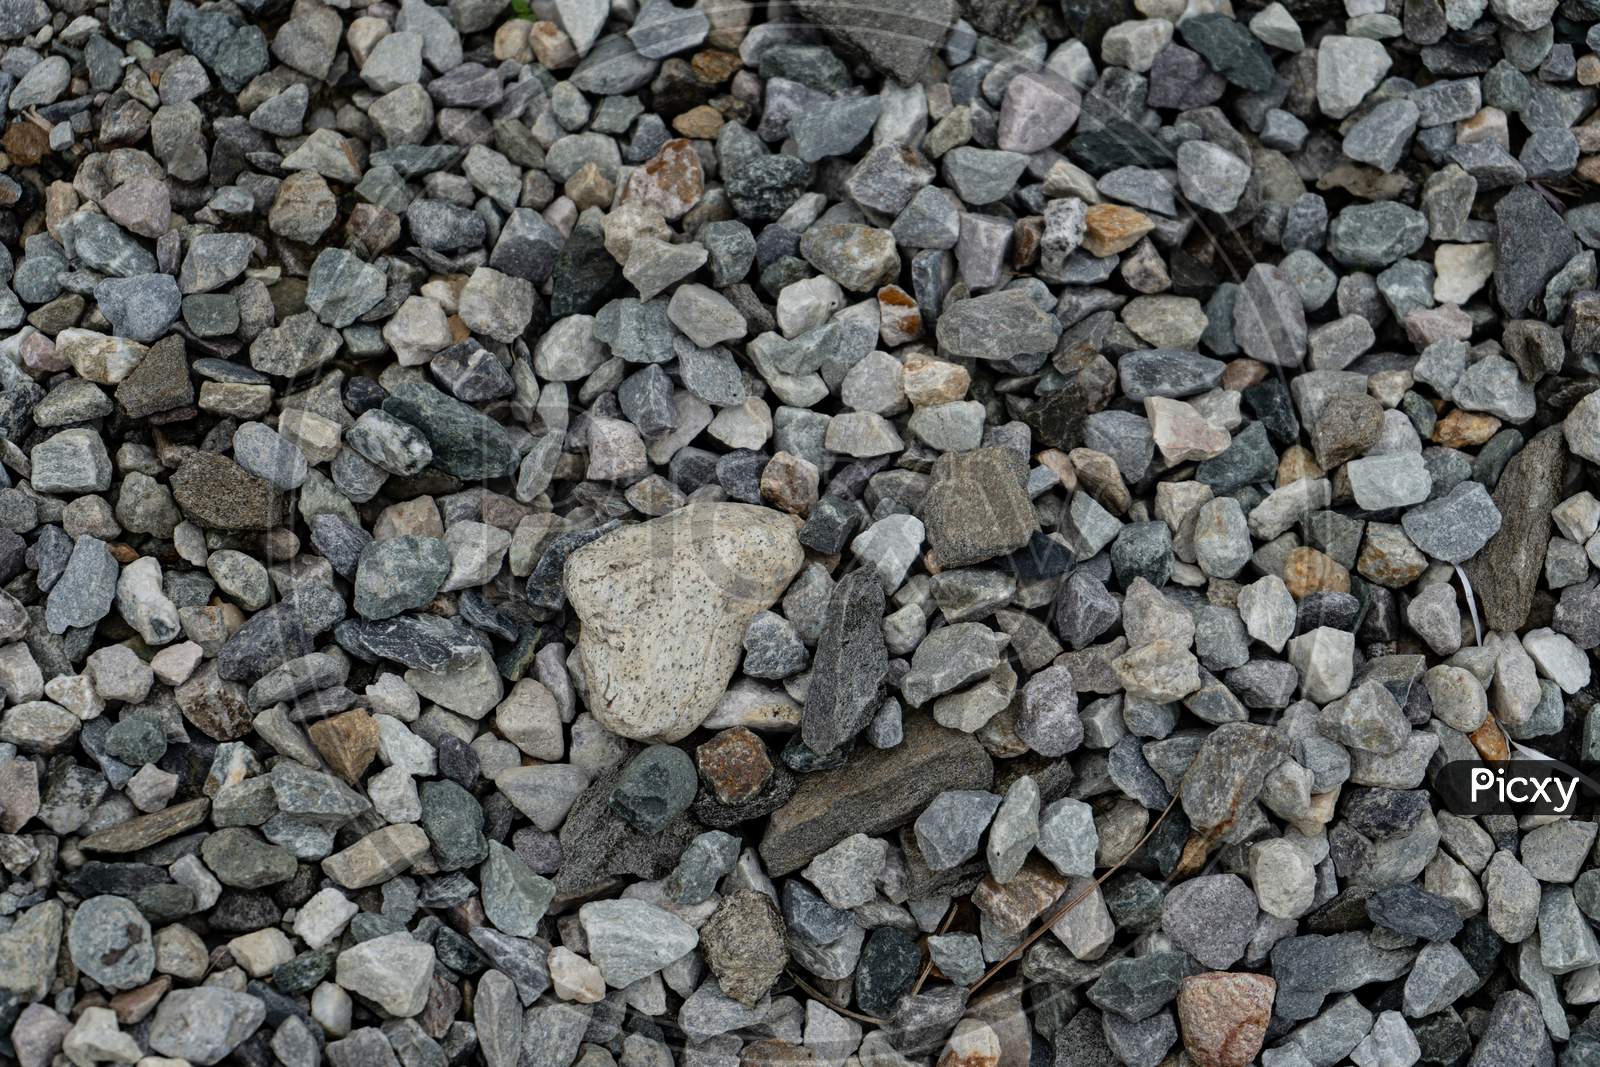 Abstract Design Formed By Various Numbers Of Pebbles Scattered In The Lawn, Background Texture Of Pebbles.